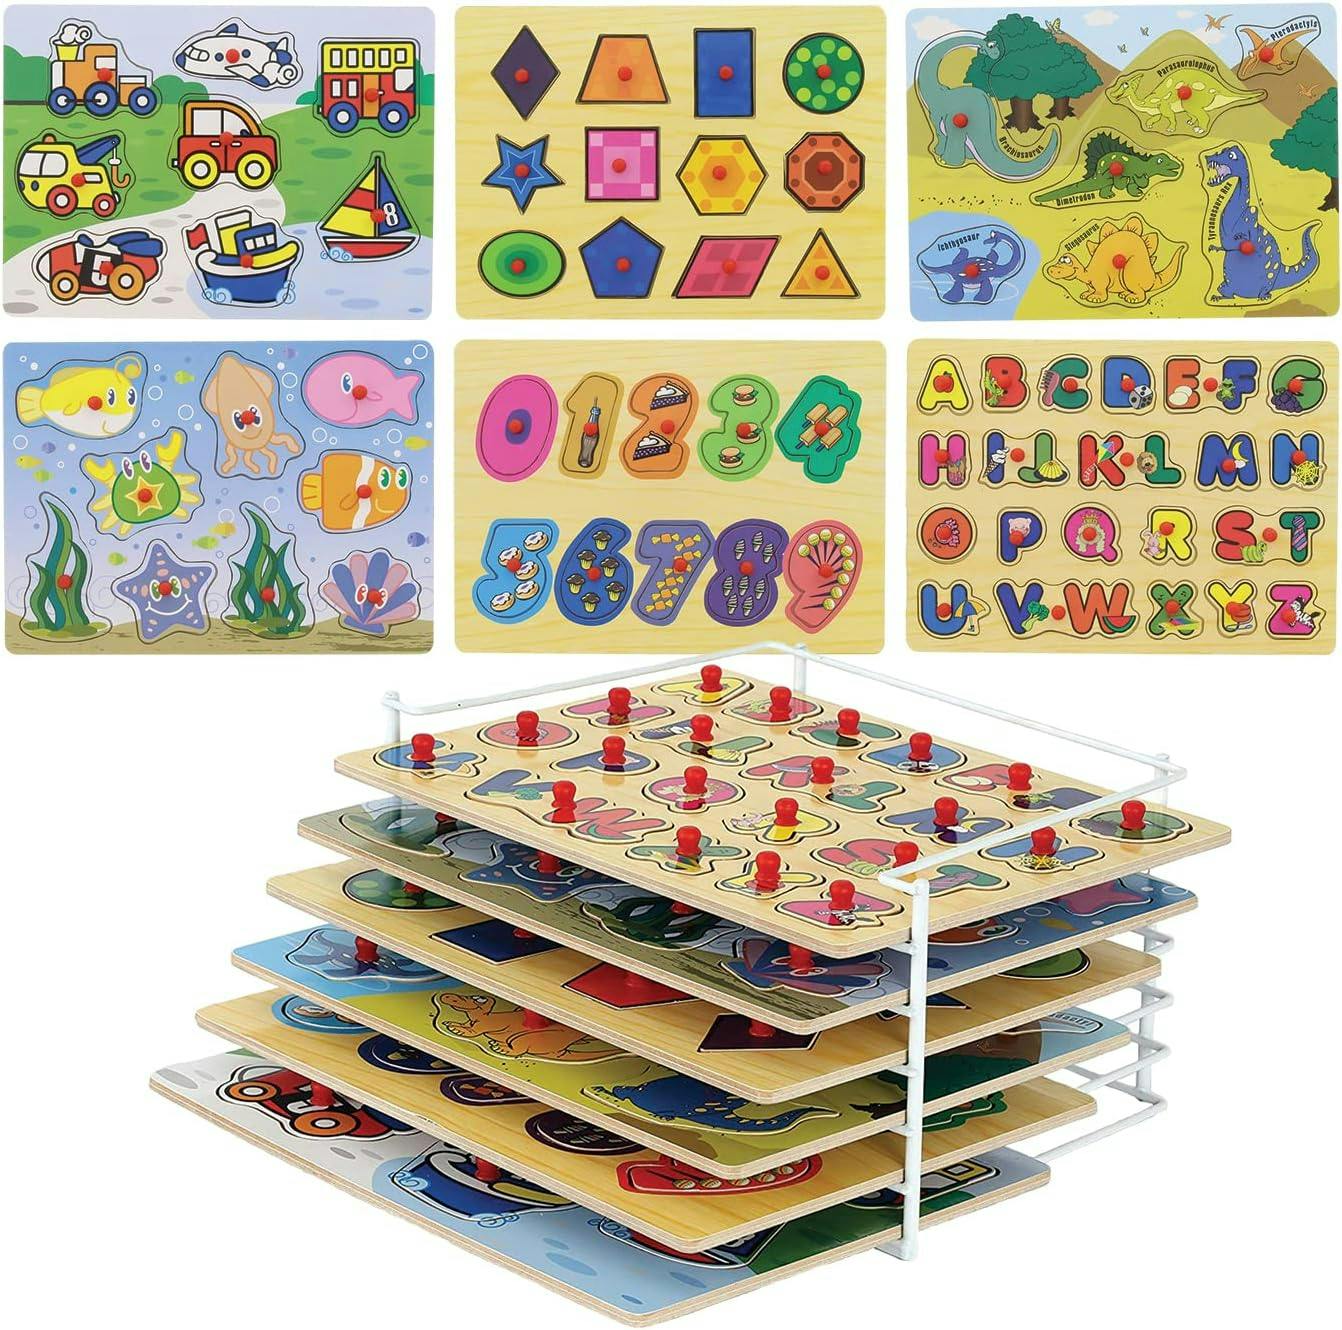 Bright Animal & Geometric Shapes Wooden Puzzle Set for Kids